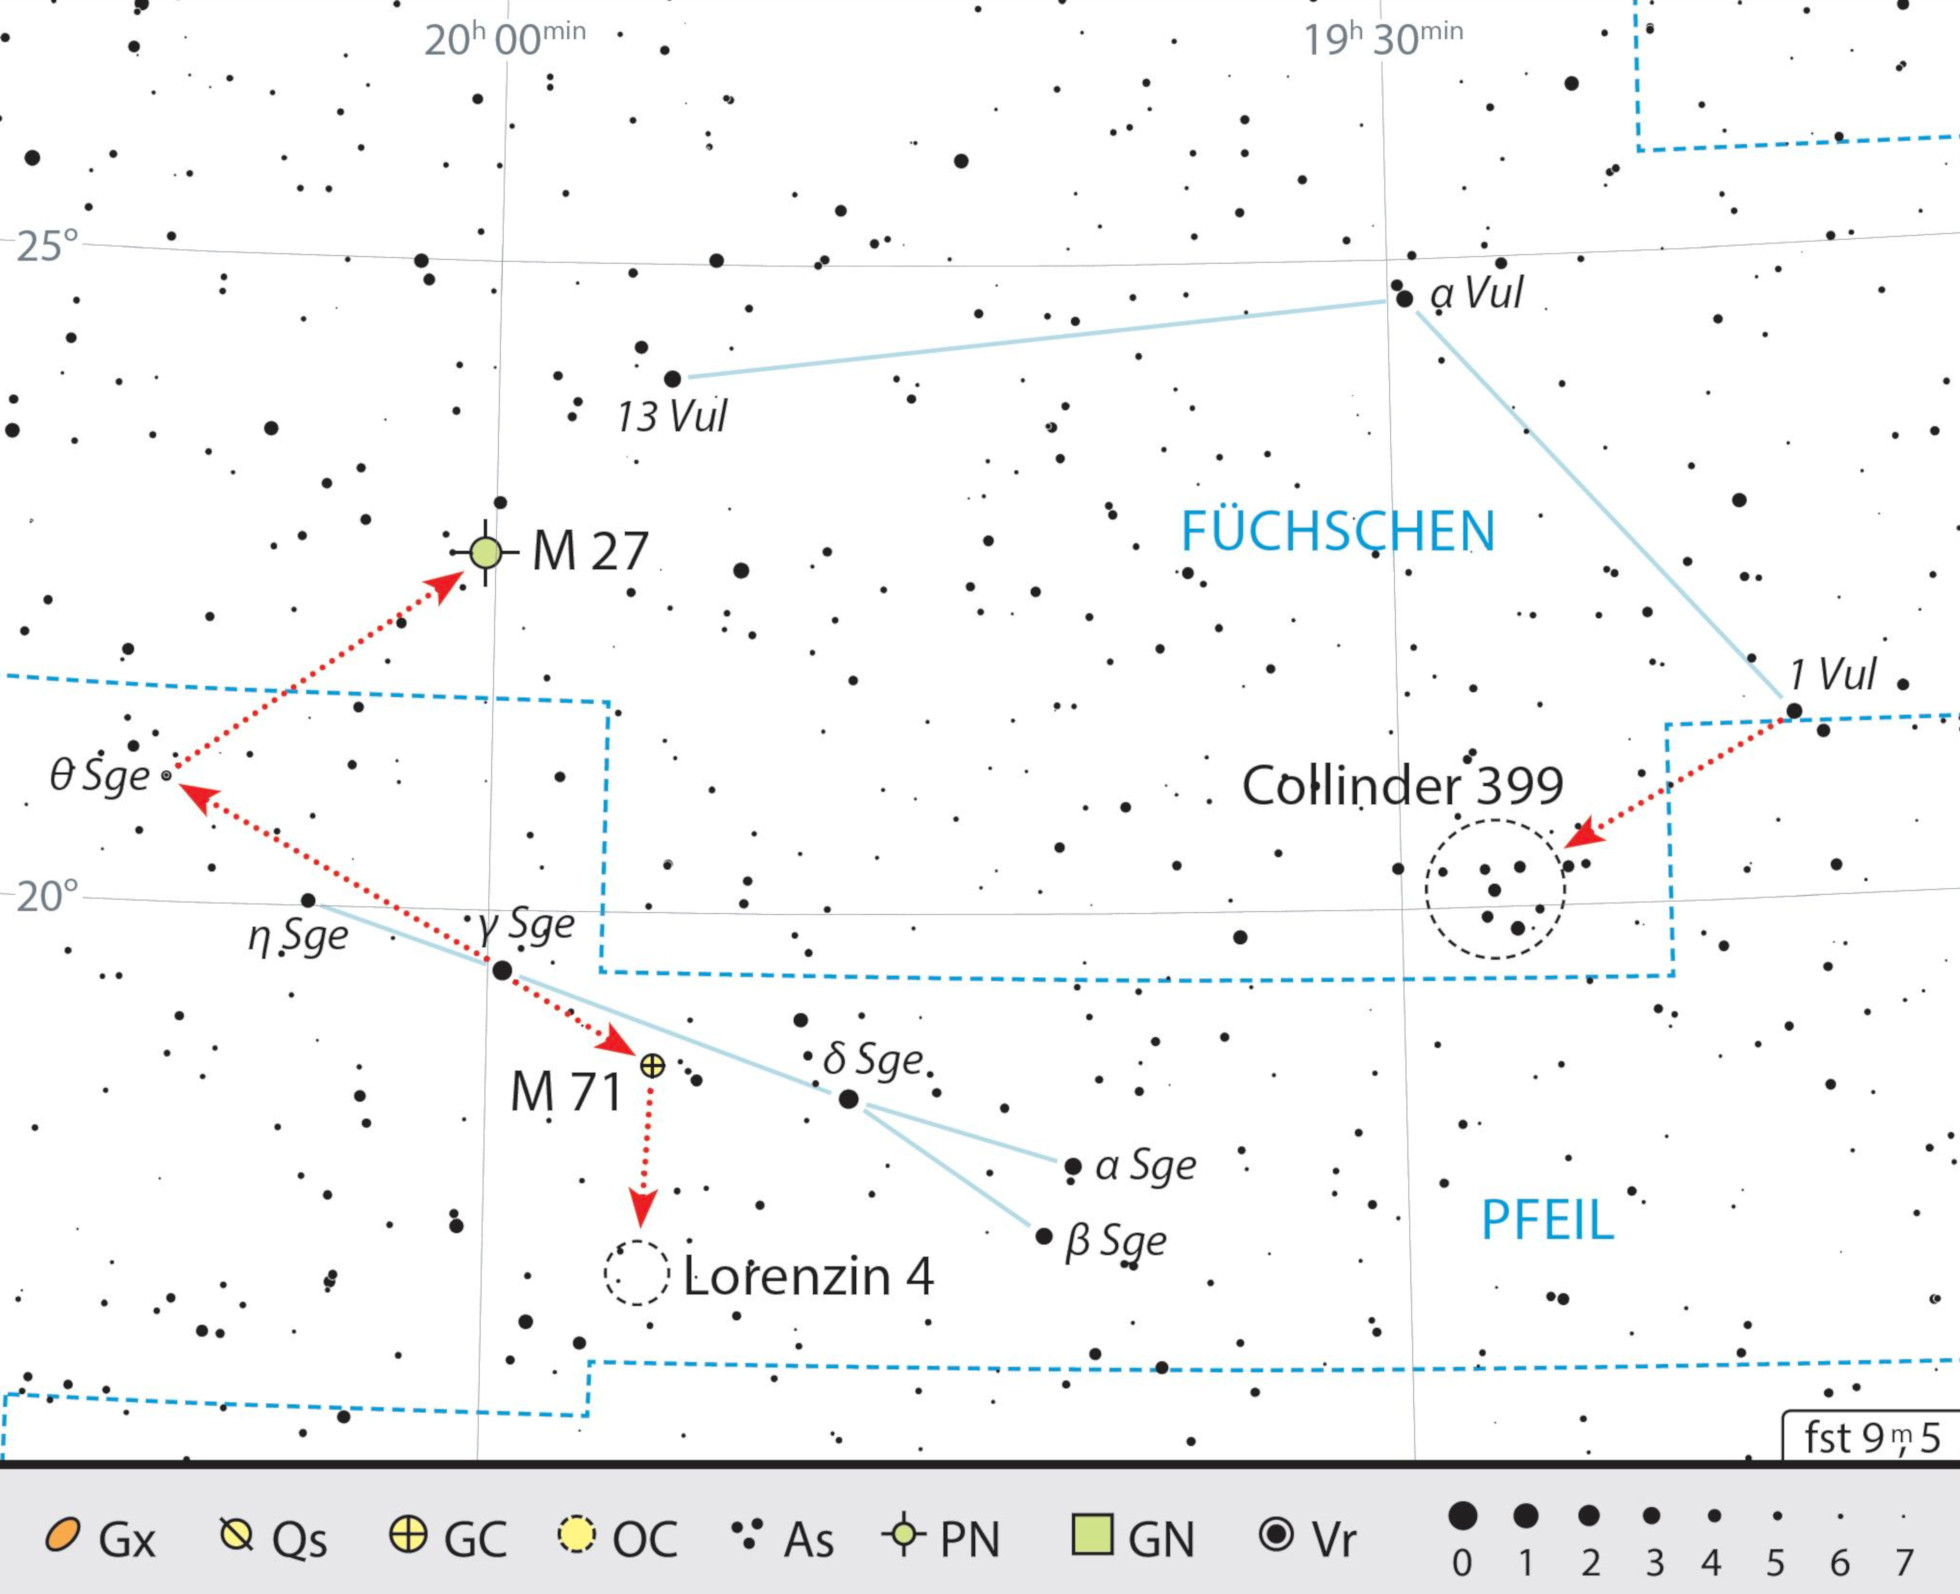 Small, but impressive! Although only a few square degrees in size, the area of sky around Sagitta and Vulpecula offer lots of fun observing targets (not only) for binoculars. J. Scholten